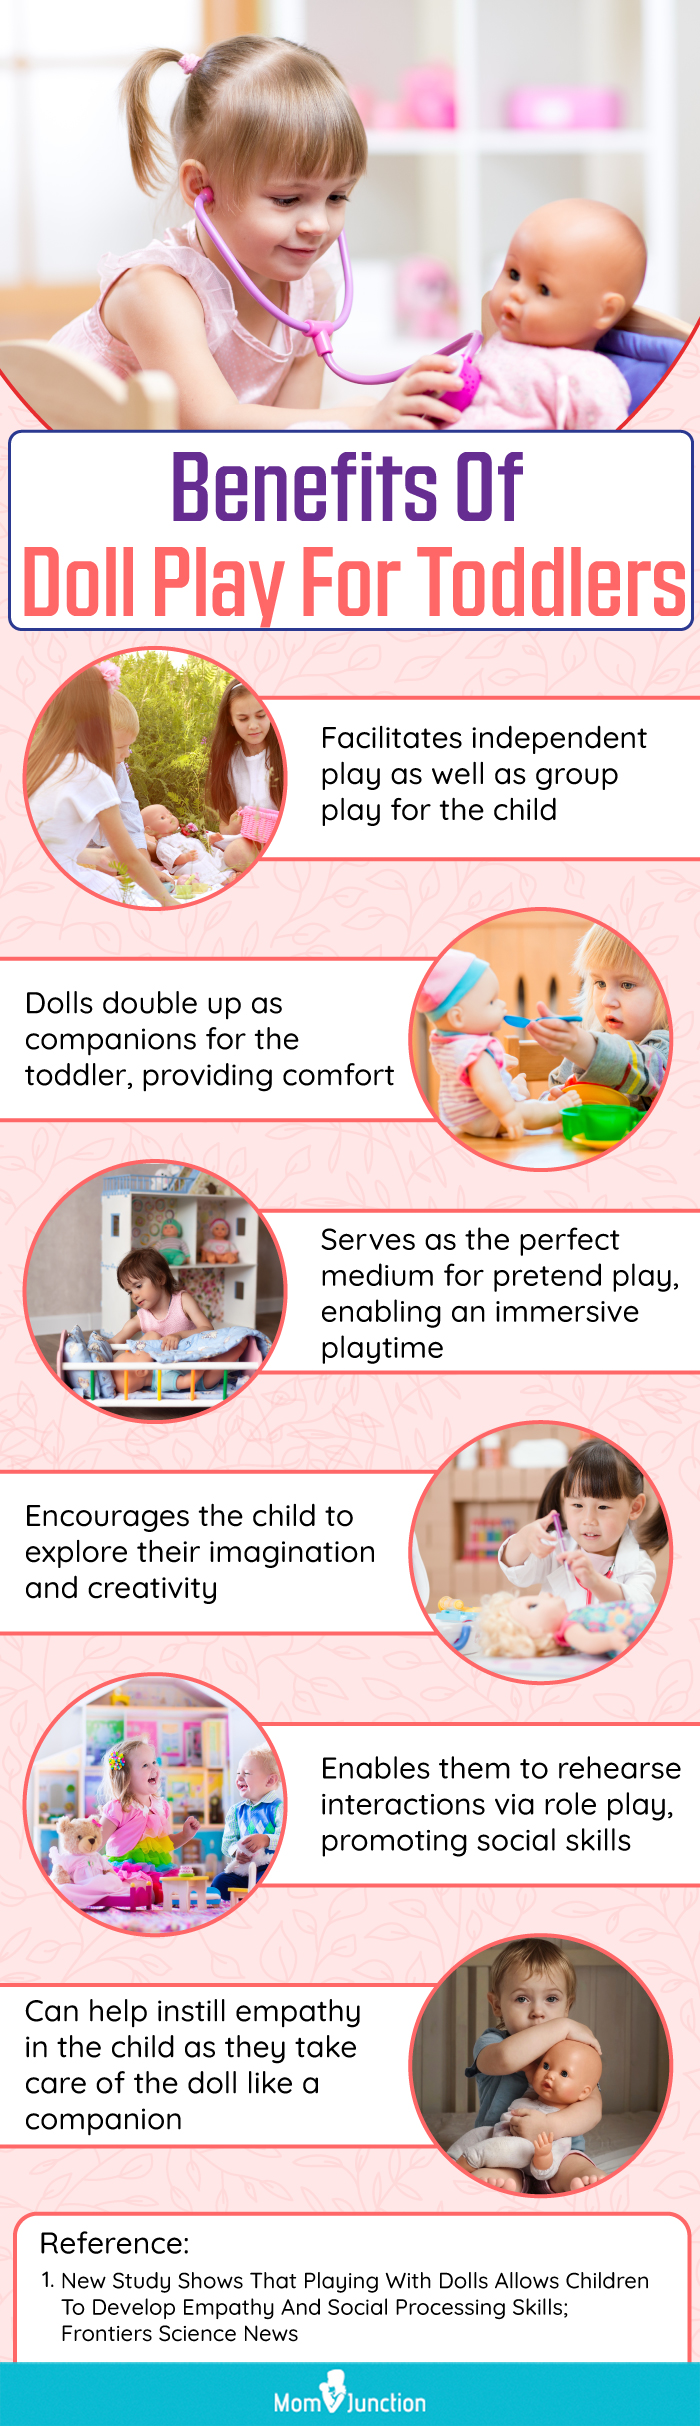 Benefits Of Doll Play For Toddlers (infographic)